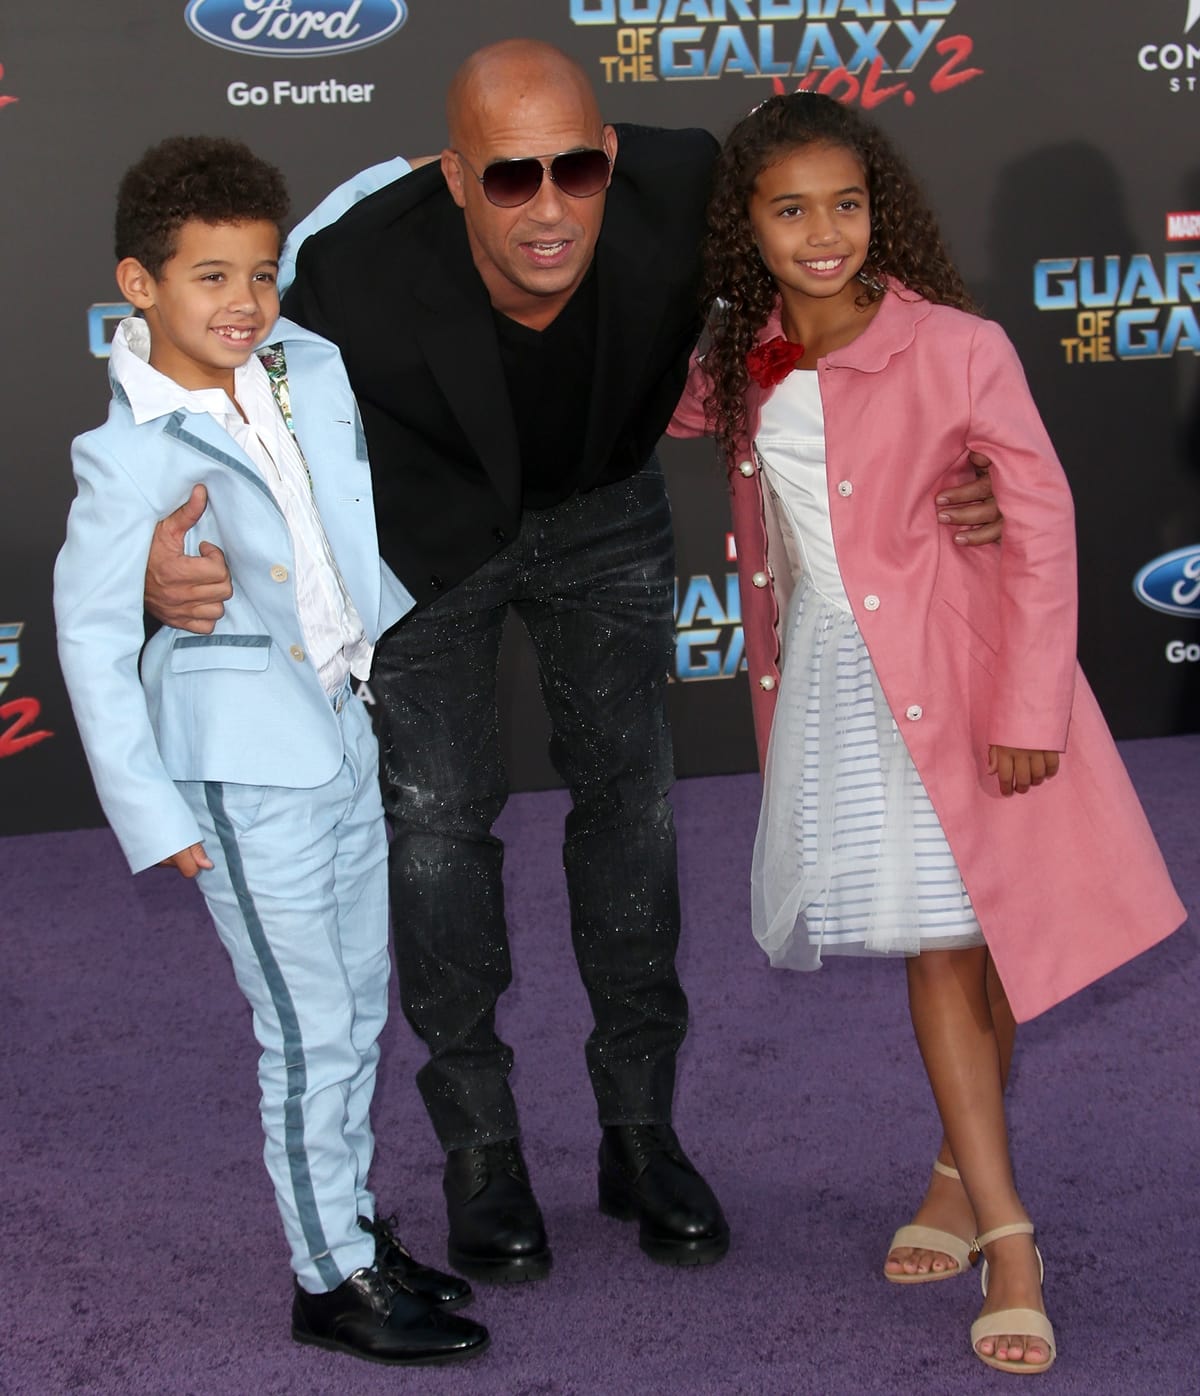 Mark Sinclair, known professionally as Vin Diesel, with his children Hania "Similce" Riley Sinclair and Vincent Sinclair